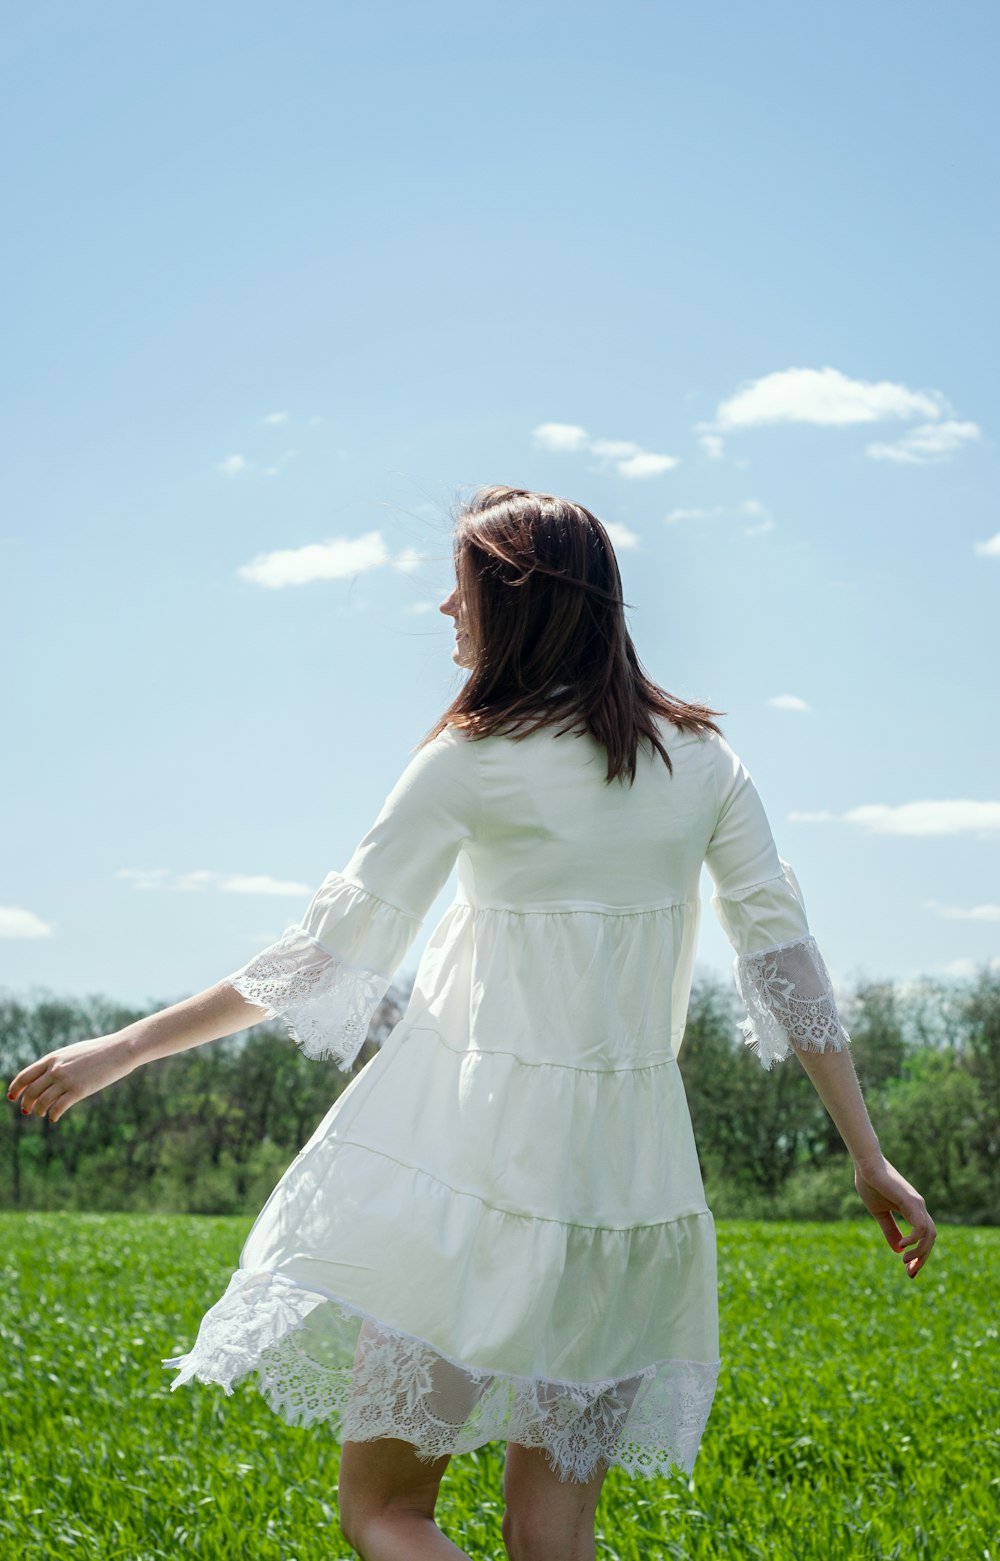 woman in white long sleeve dress standing on green grass field during daytime